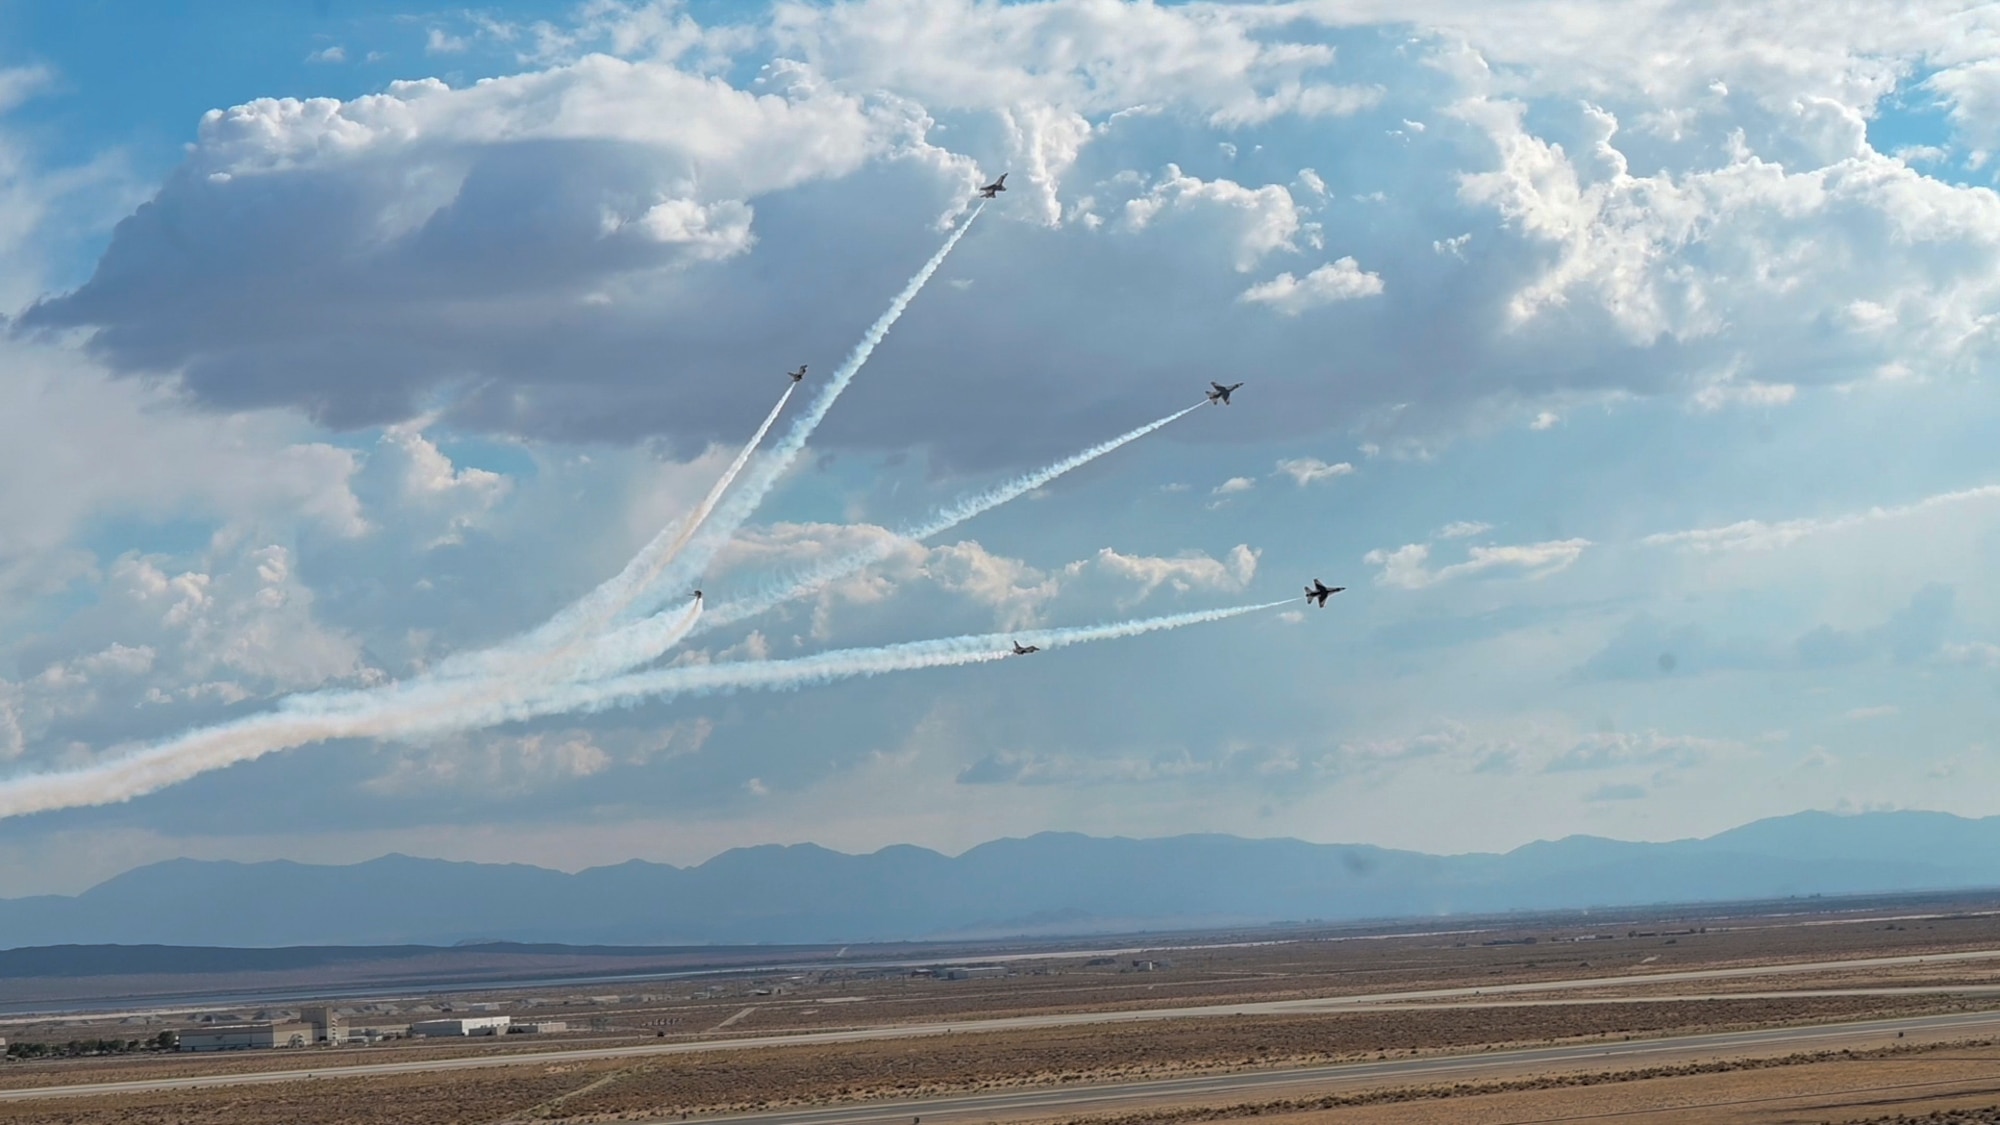 The USAF Thunderbirds perform precision aerial maneuvers during the 2022 Aerospace Valley Air Show at Edwards Air Force Base. (U.S. Air Force photo by Adam Bowles)